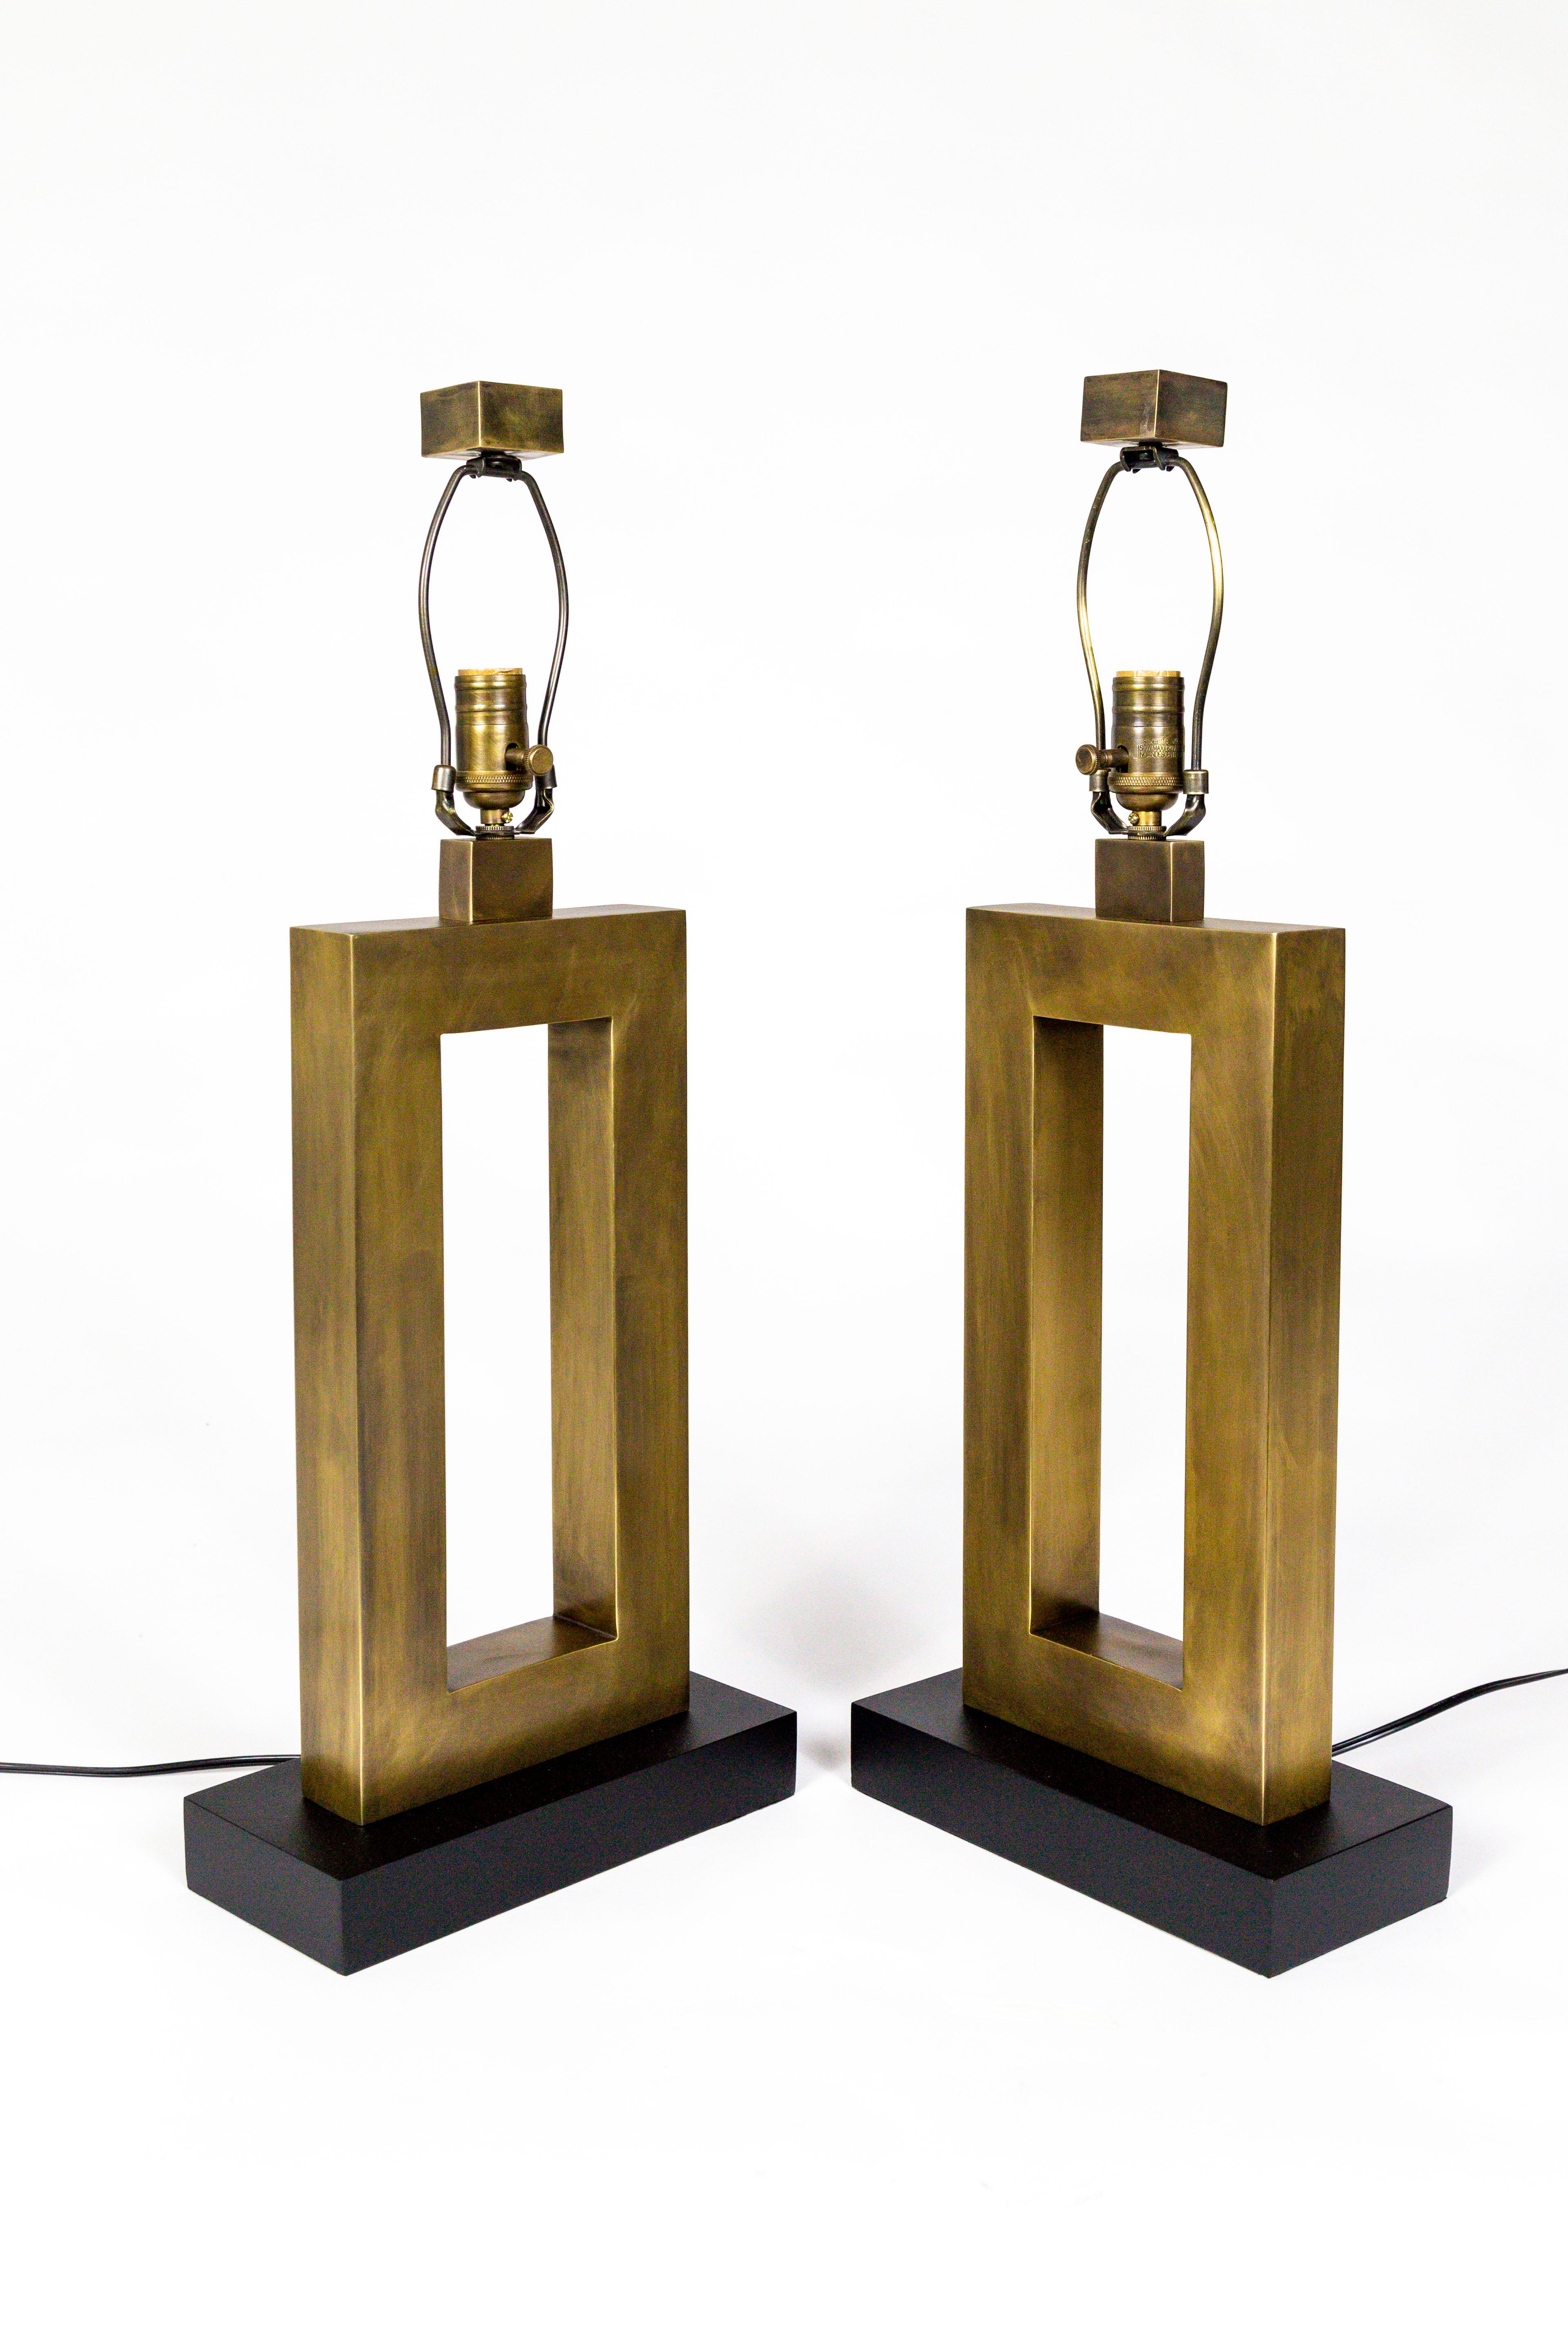 A striking pair of newly restored, 1970s antique brass, rectangular lamps; with amazingly seamless construction and flawless design. Standing on beautifully finished, black, eggshell, wood bases, and topped with complimenting square finials.